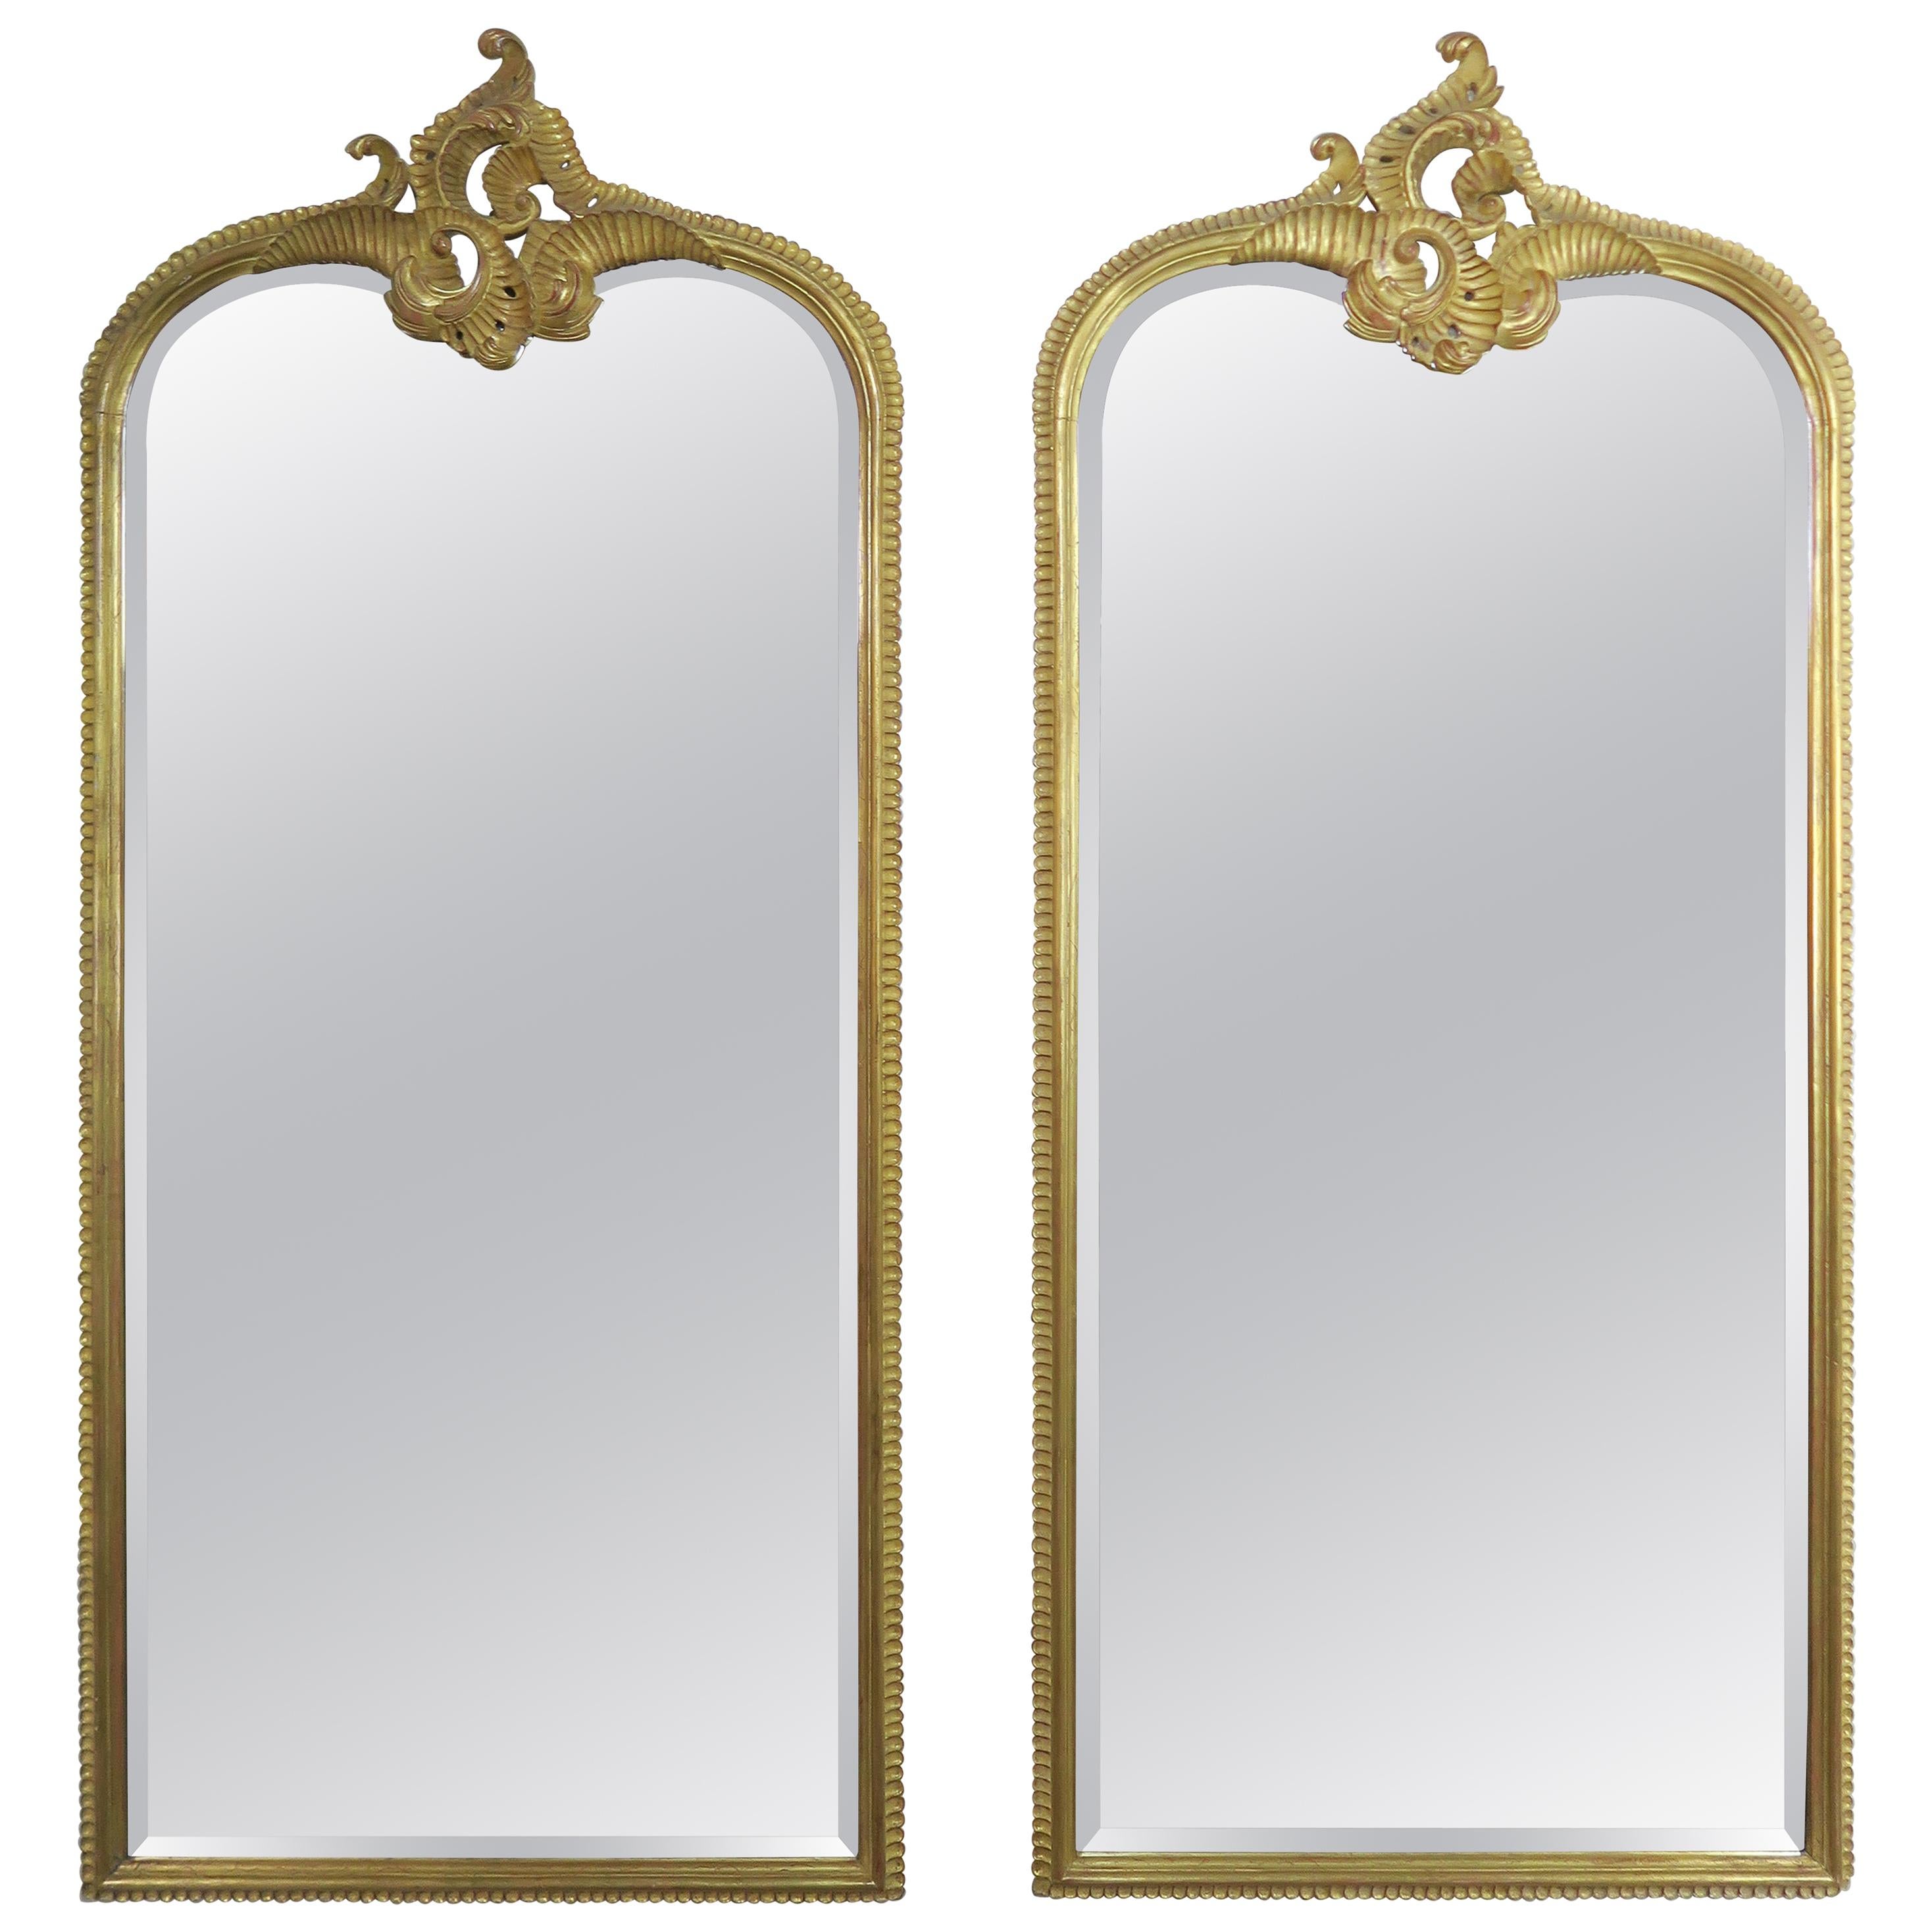 Monumental Mirrors Carved Wood Gilt Wood Mirrors, Pair